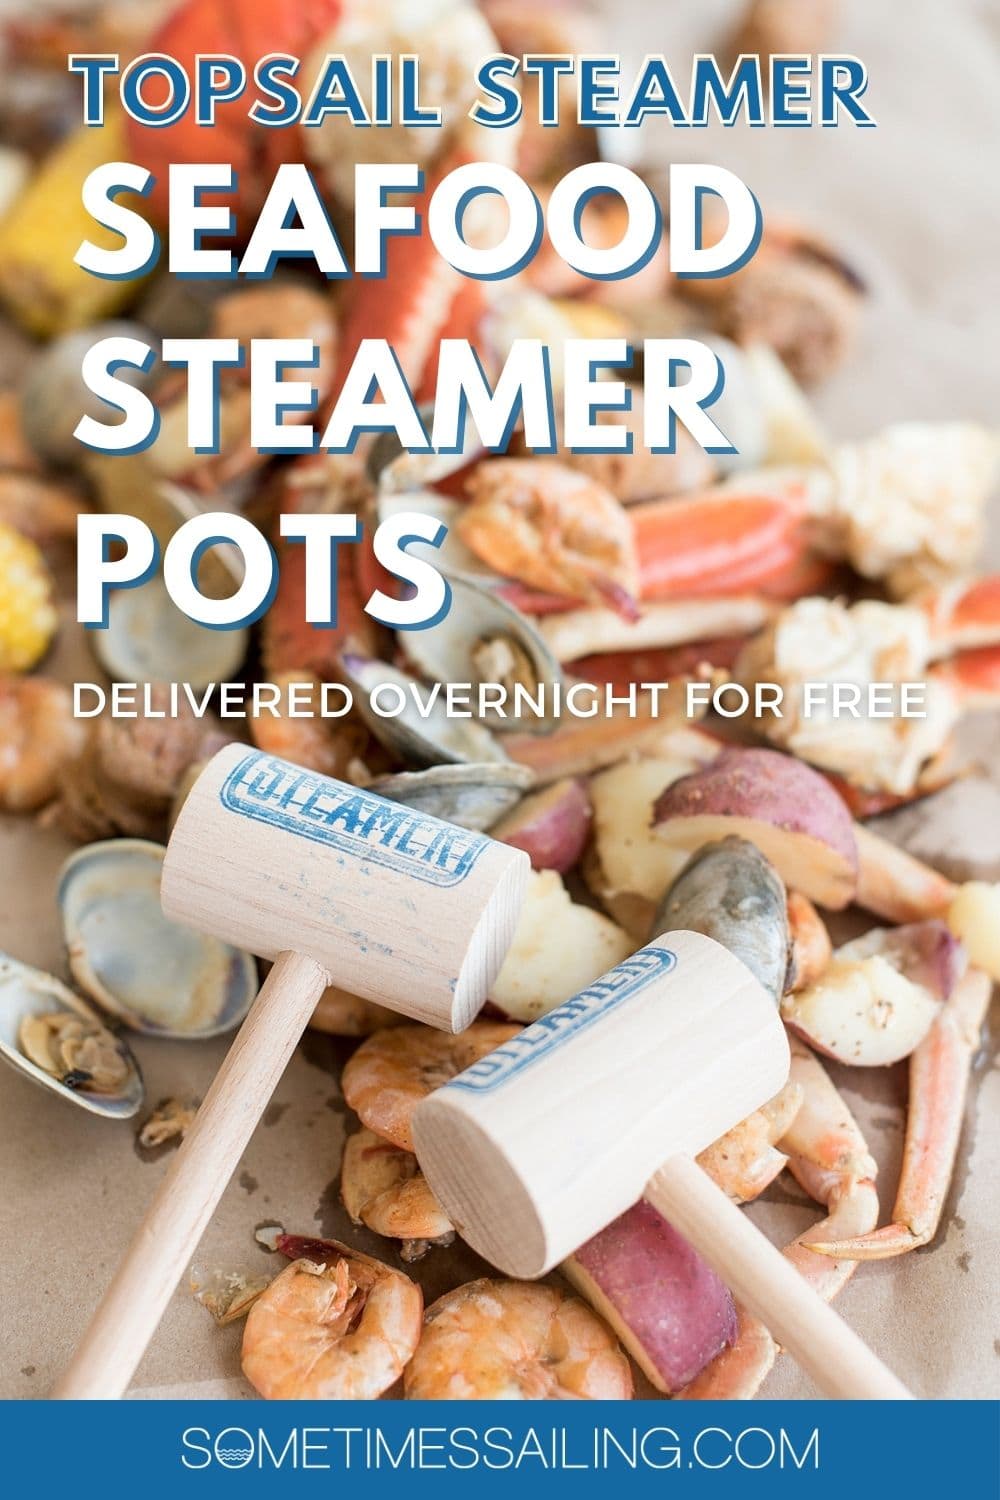 Pinterest image for Topsail Steamer with a seafood photo behind the text.